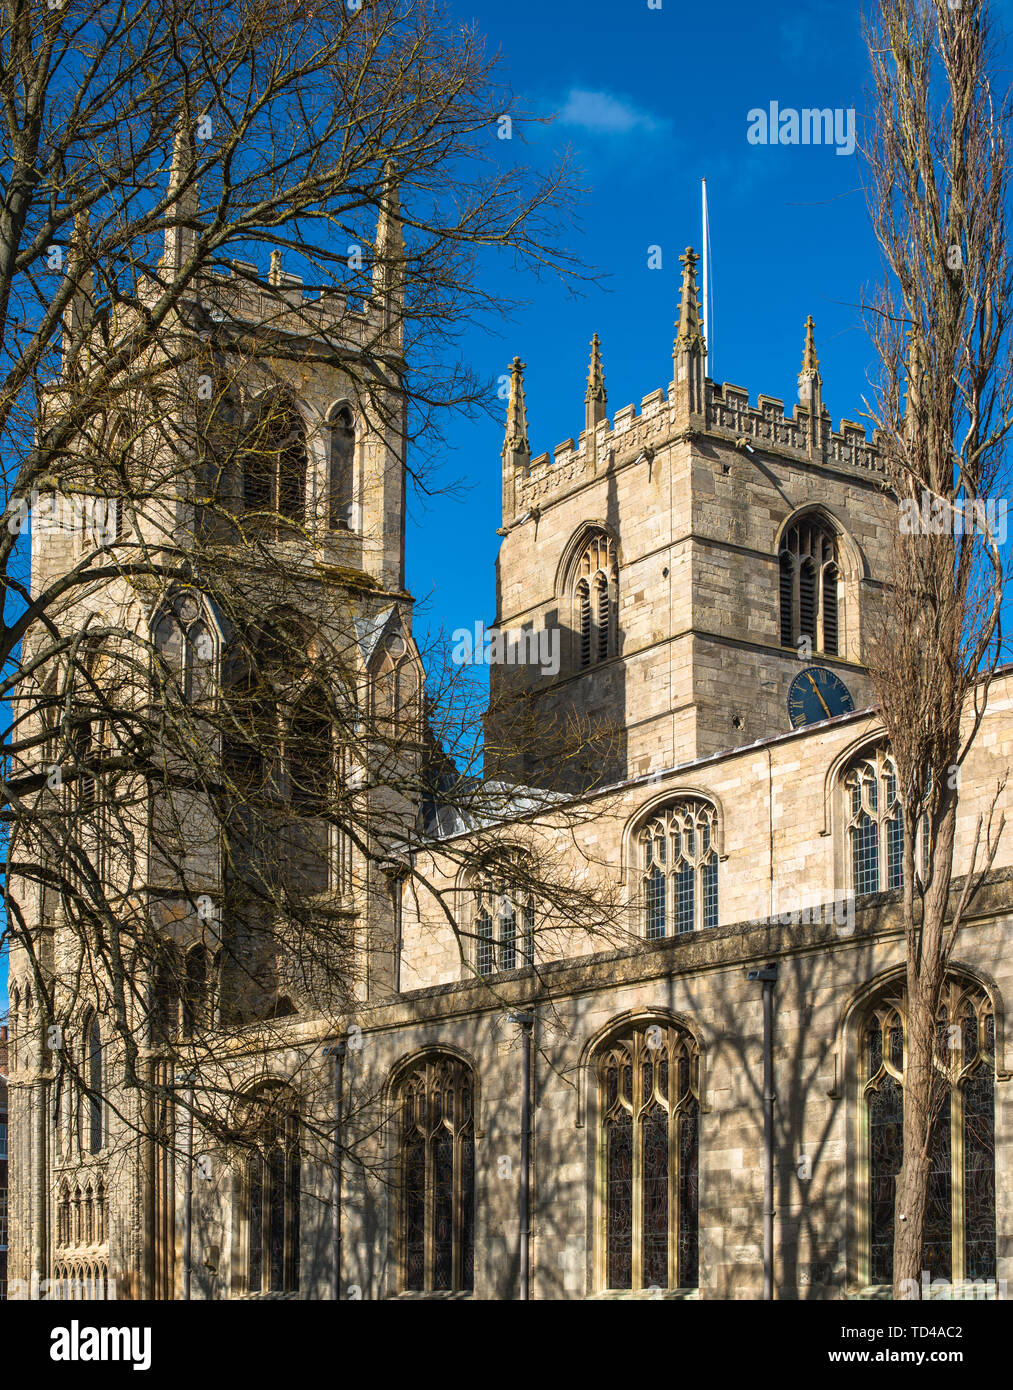 The twin spires of St. Margaret's Church also known as King's Lynn Minster, Kings Lynn, Norfolk, East Anglia, England, United Kingdom, Europe Stock Photo